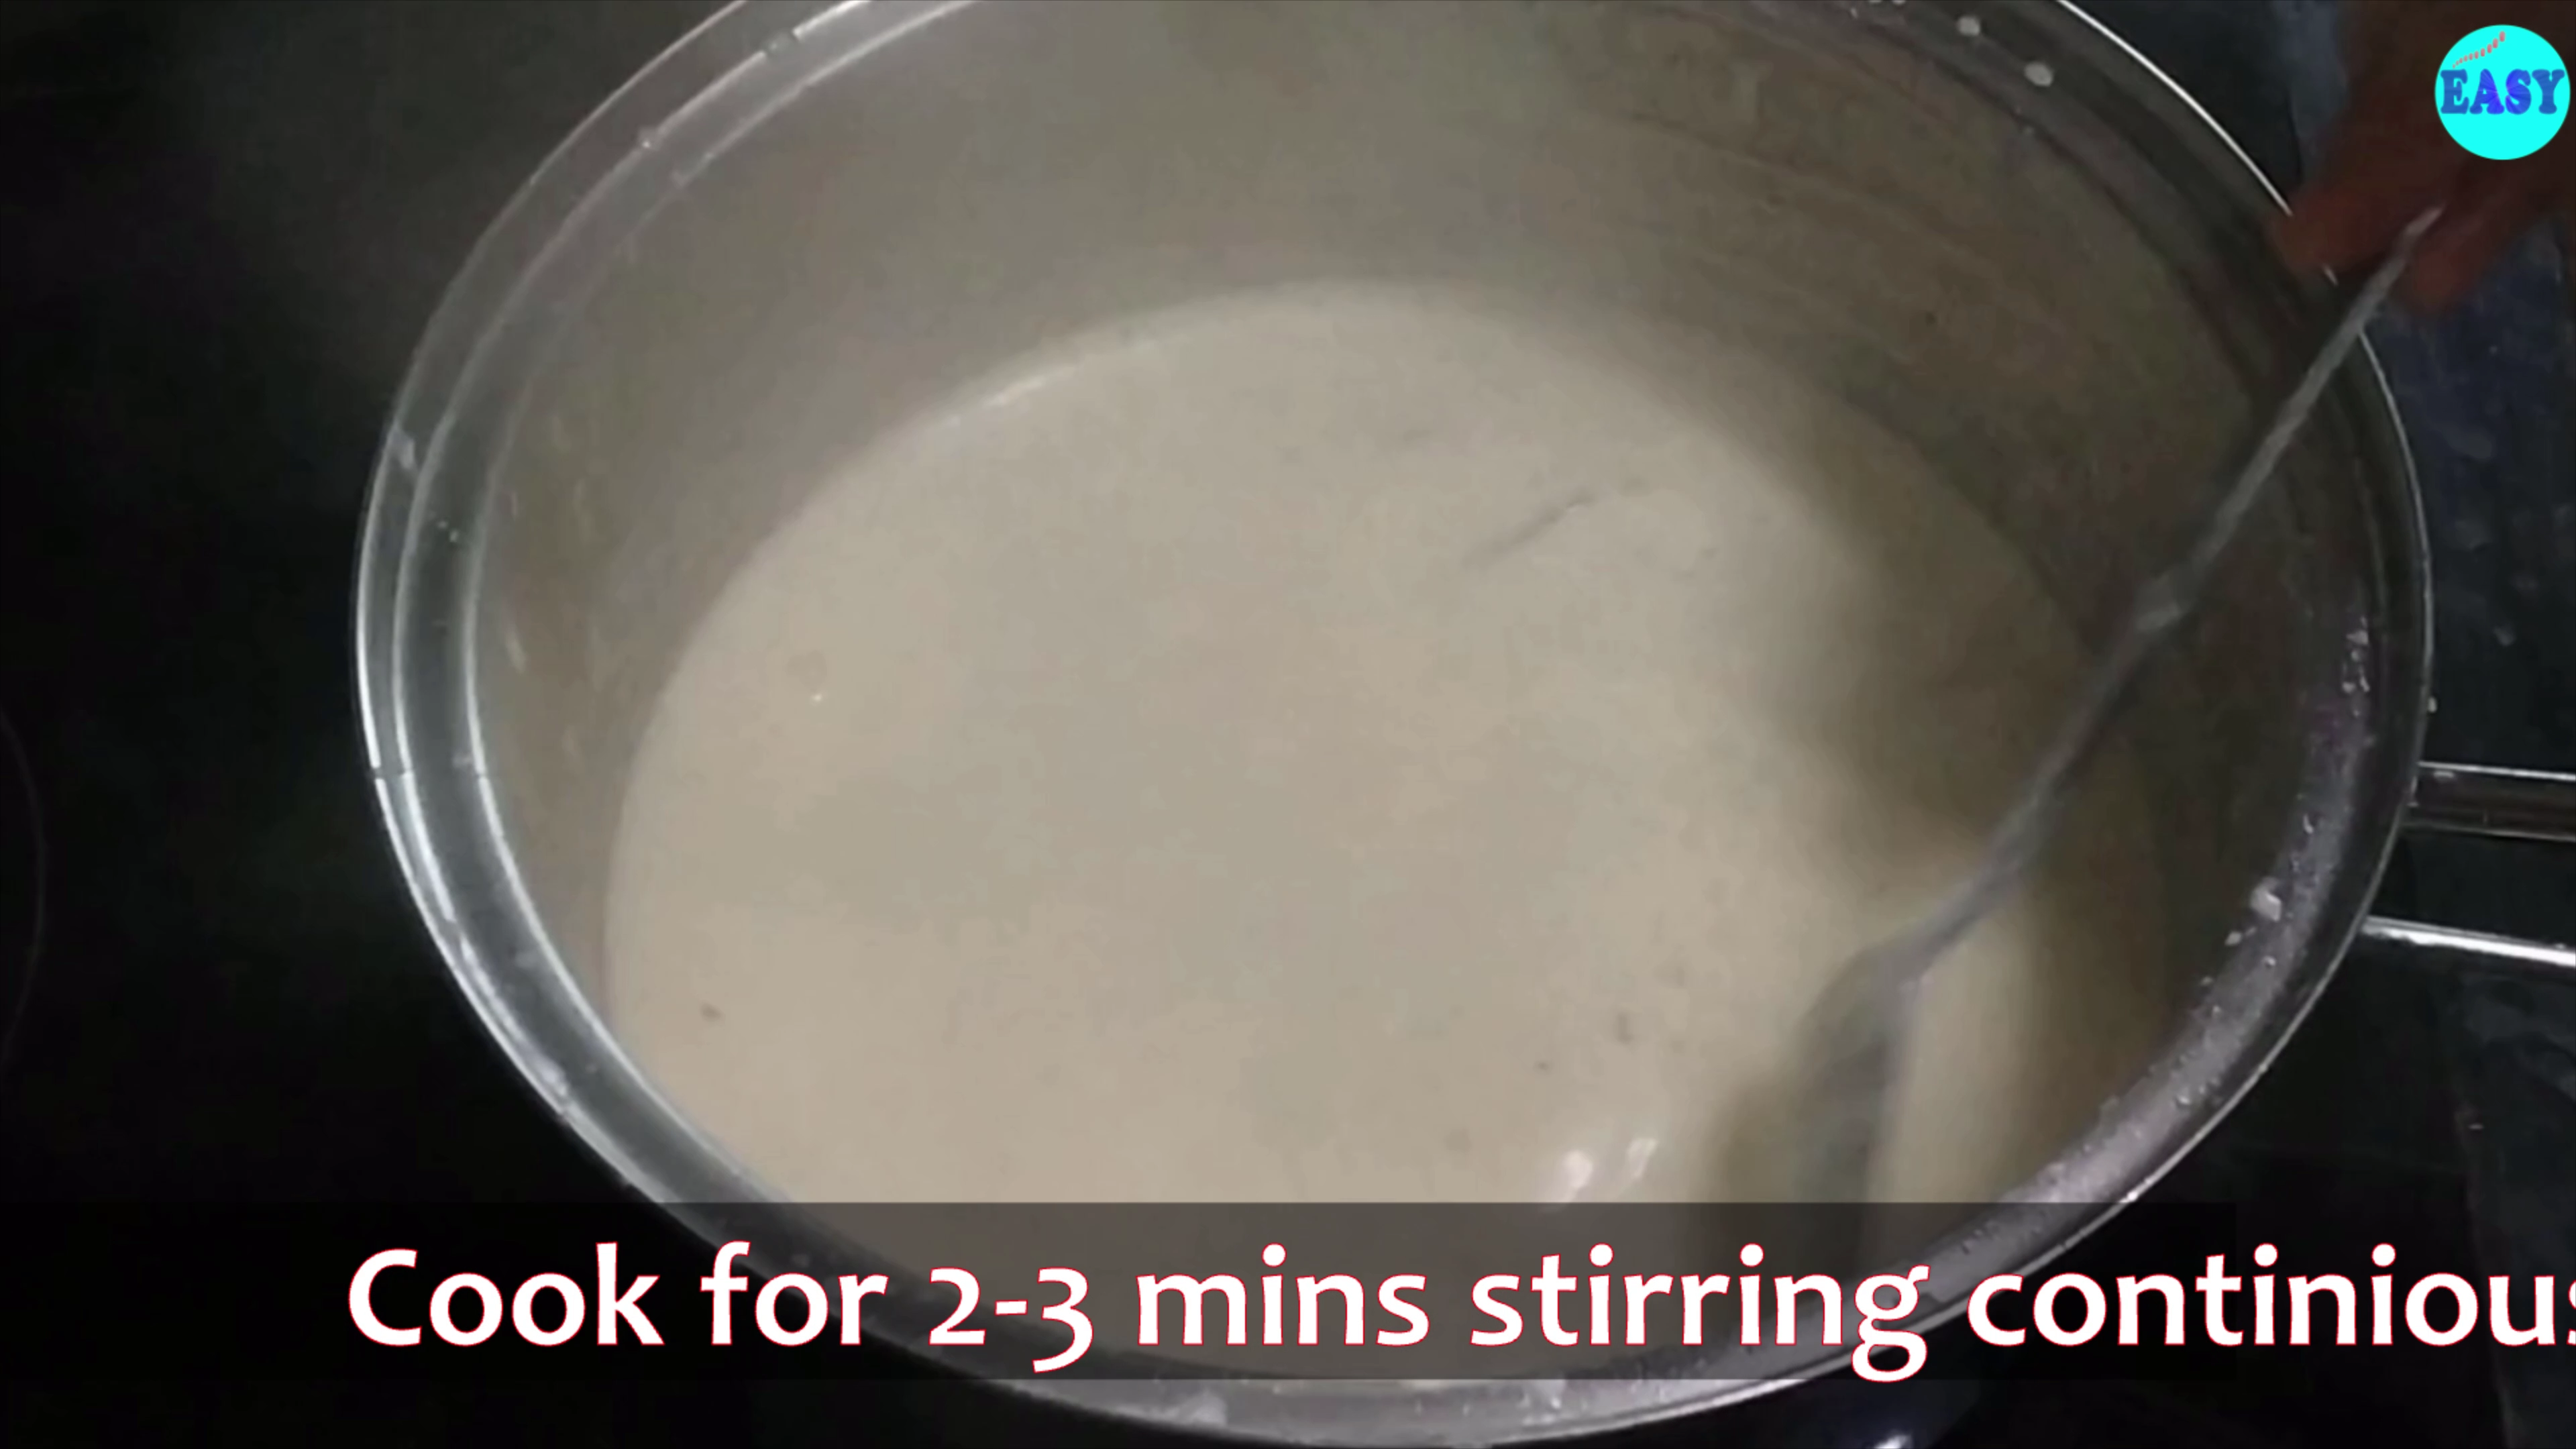 Step 4 - Stir continuously until it starts boiling, to prevent it from curdling. Cook for 2-3 minutes.